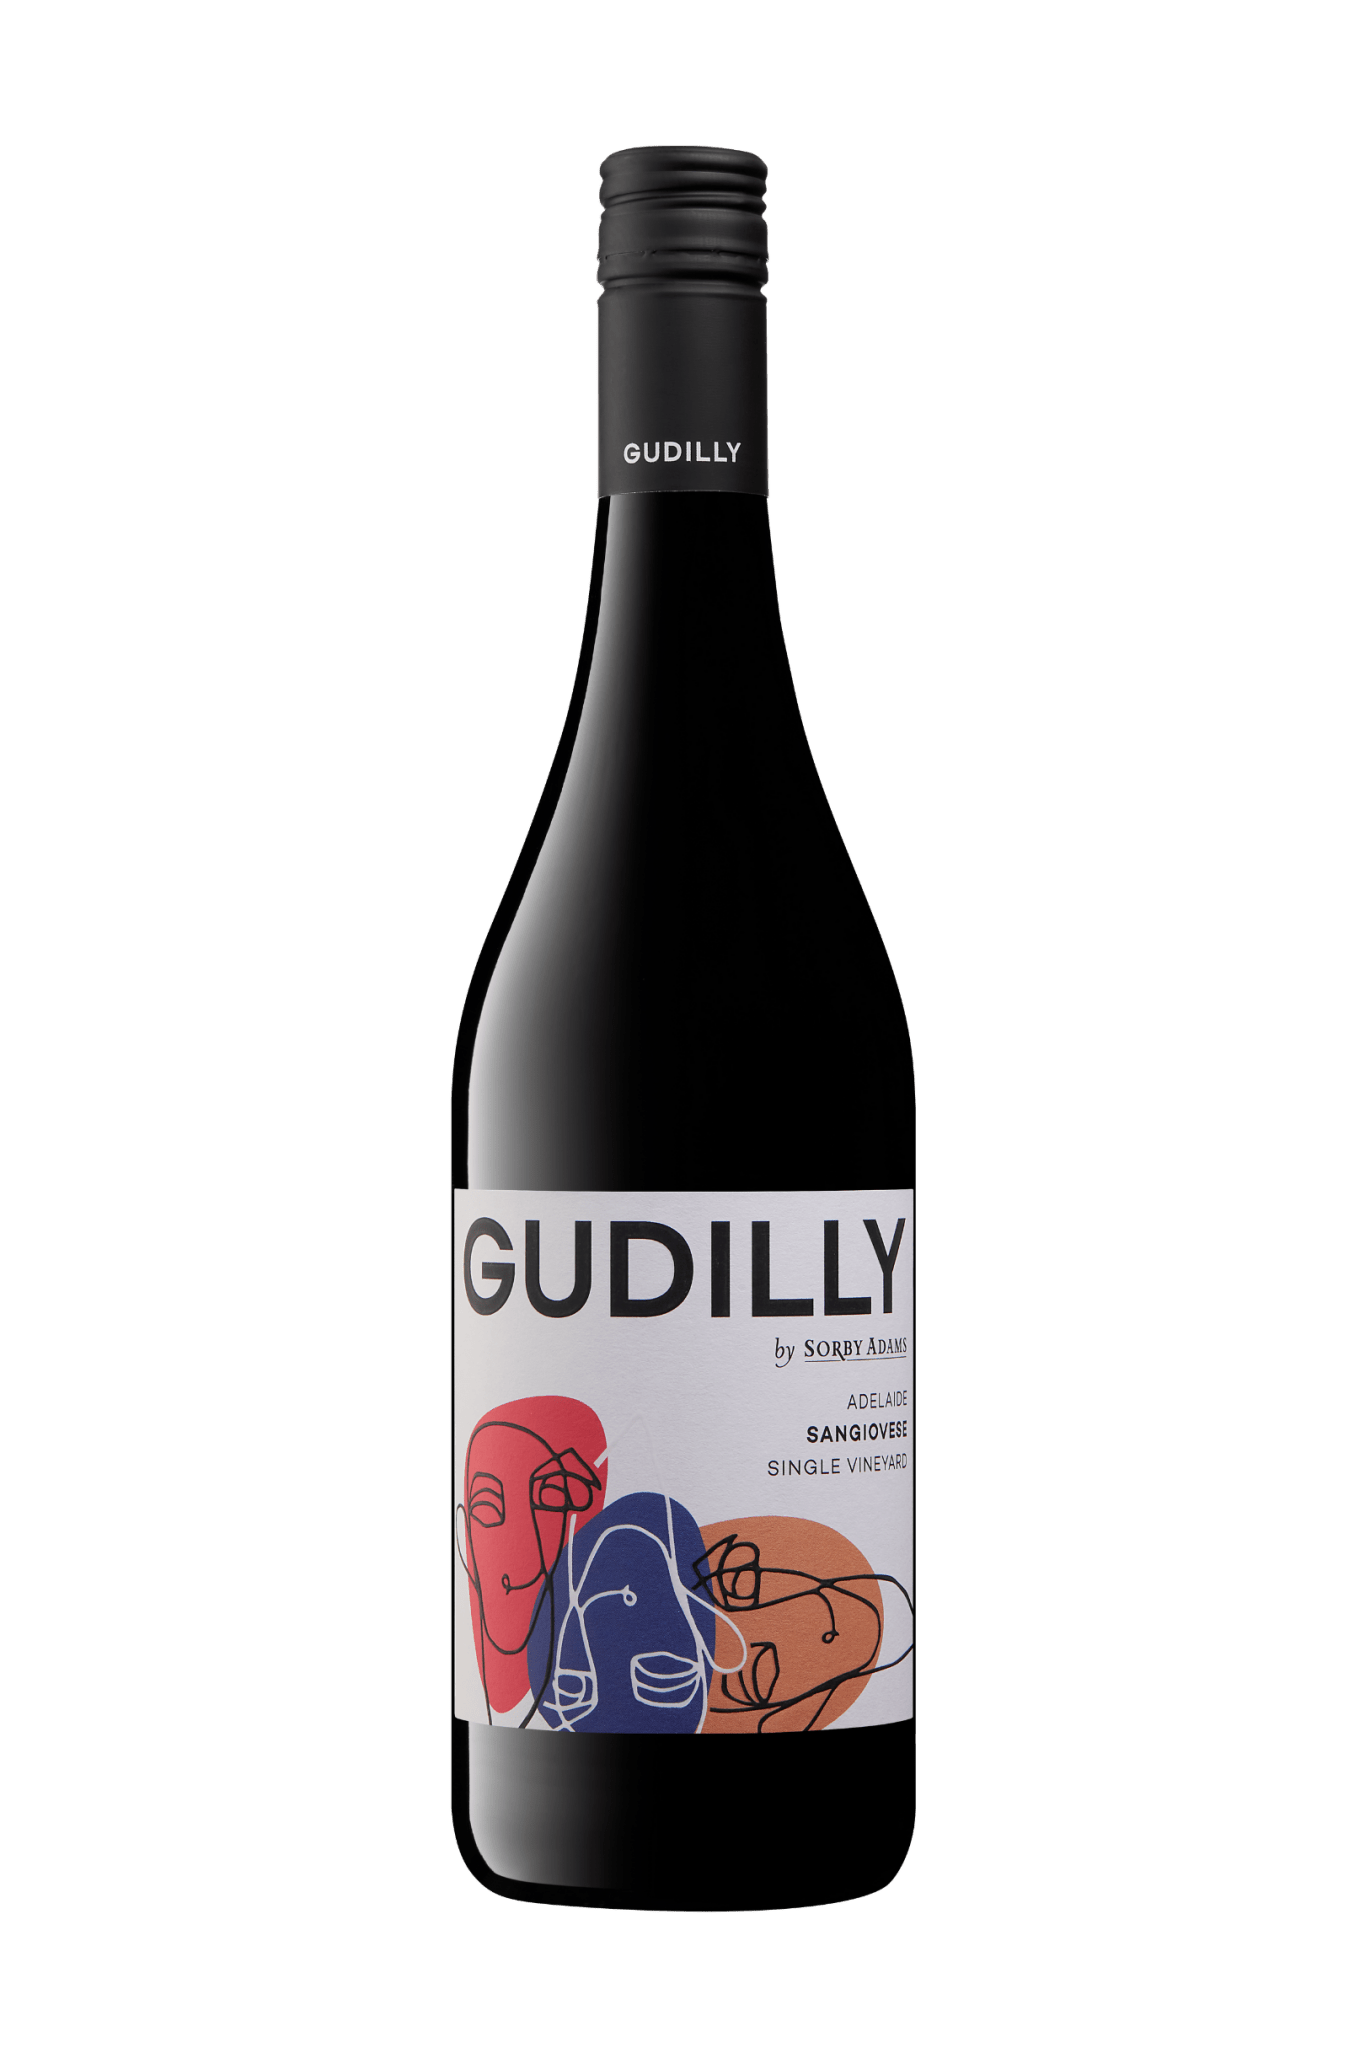 Gudilly Adelaide Sangiovese - Sangiovese - Sorby Adams Wines